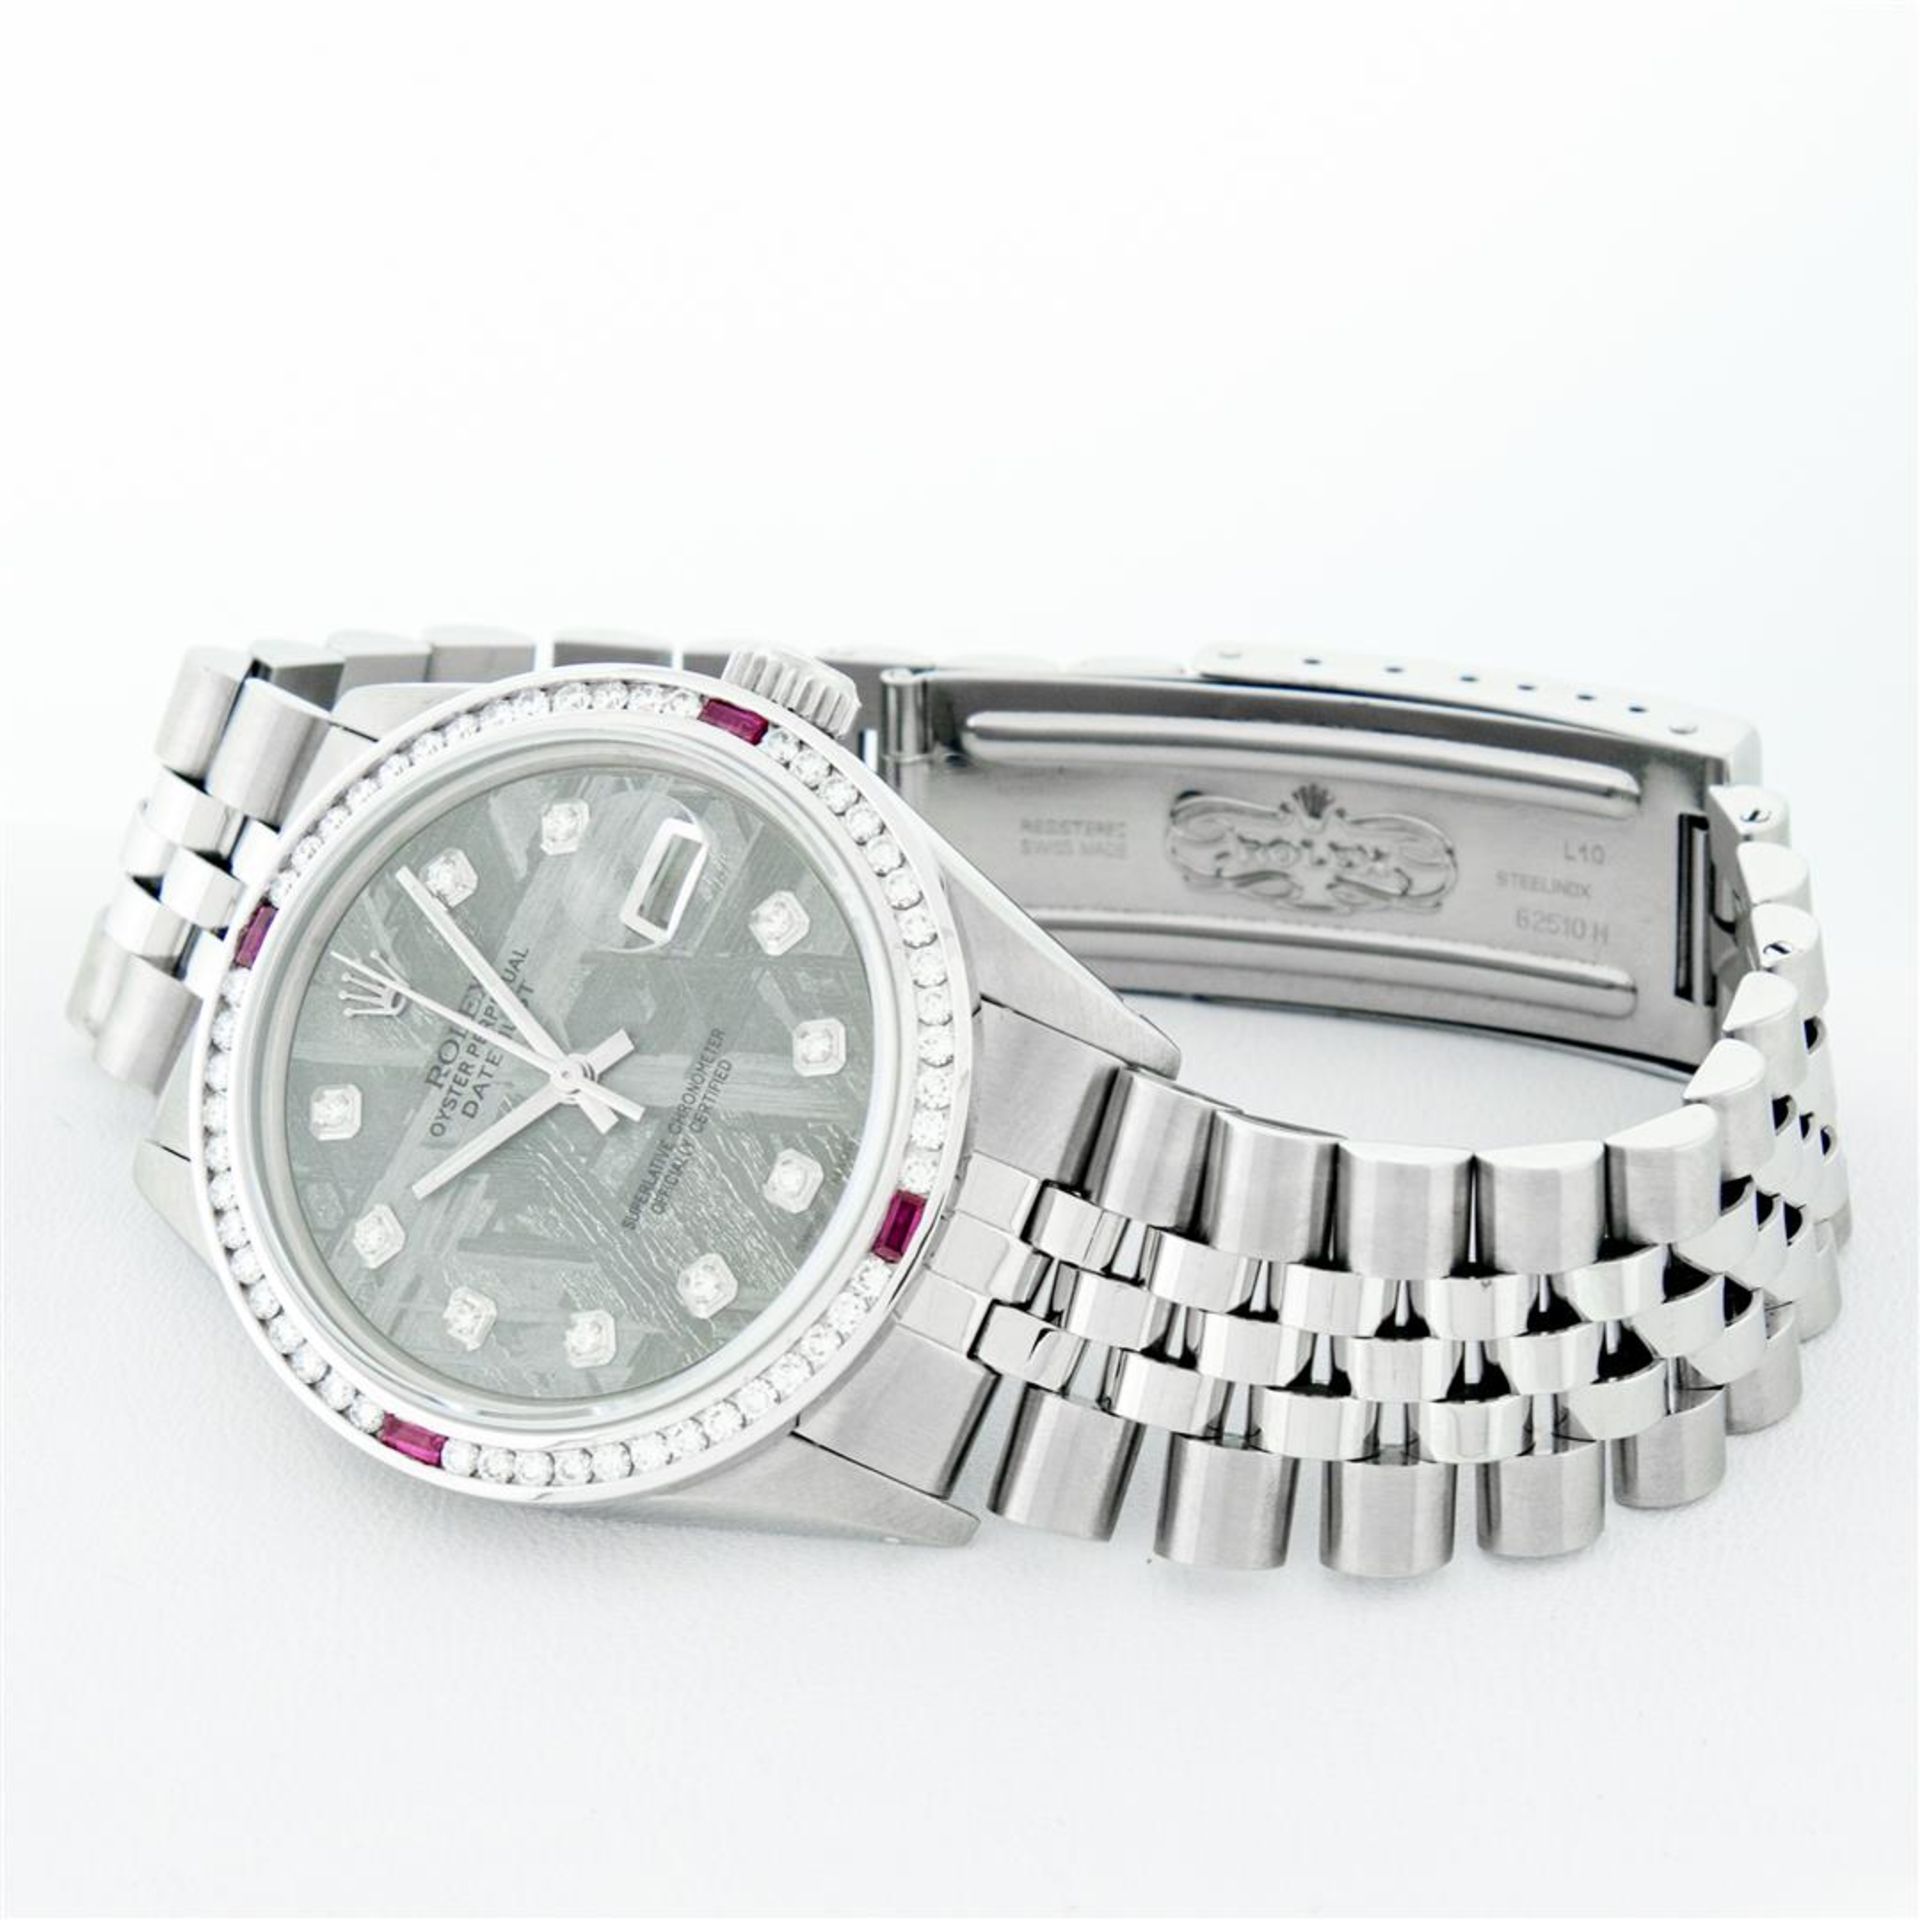 Rolex Mens SS Meteorite Diamond & Ruby Channel Set Oyster Perpetual Datejust Wri - Image 4 of 9